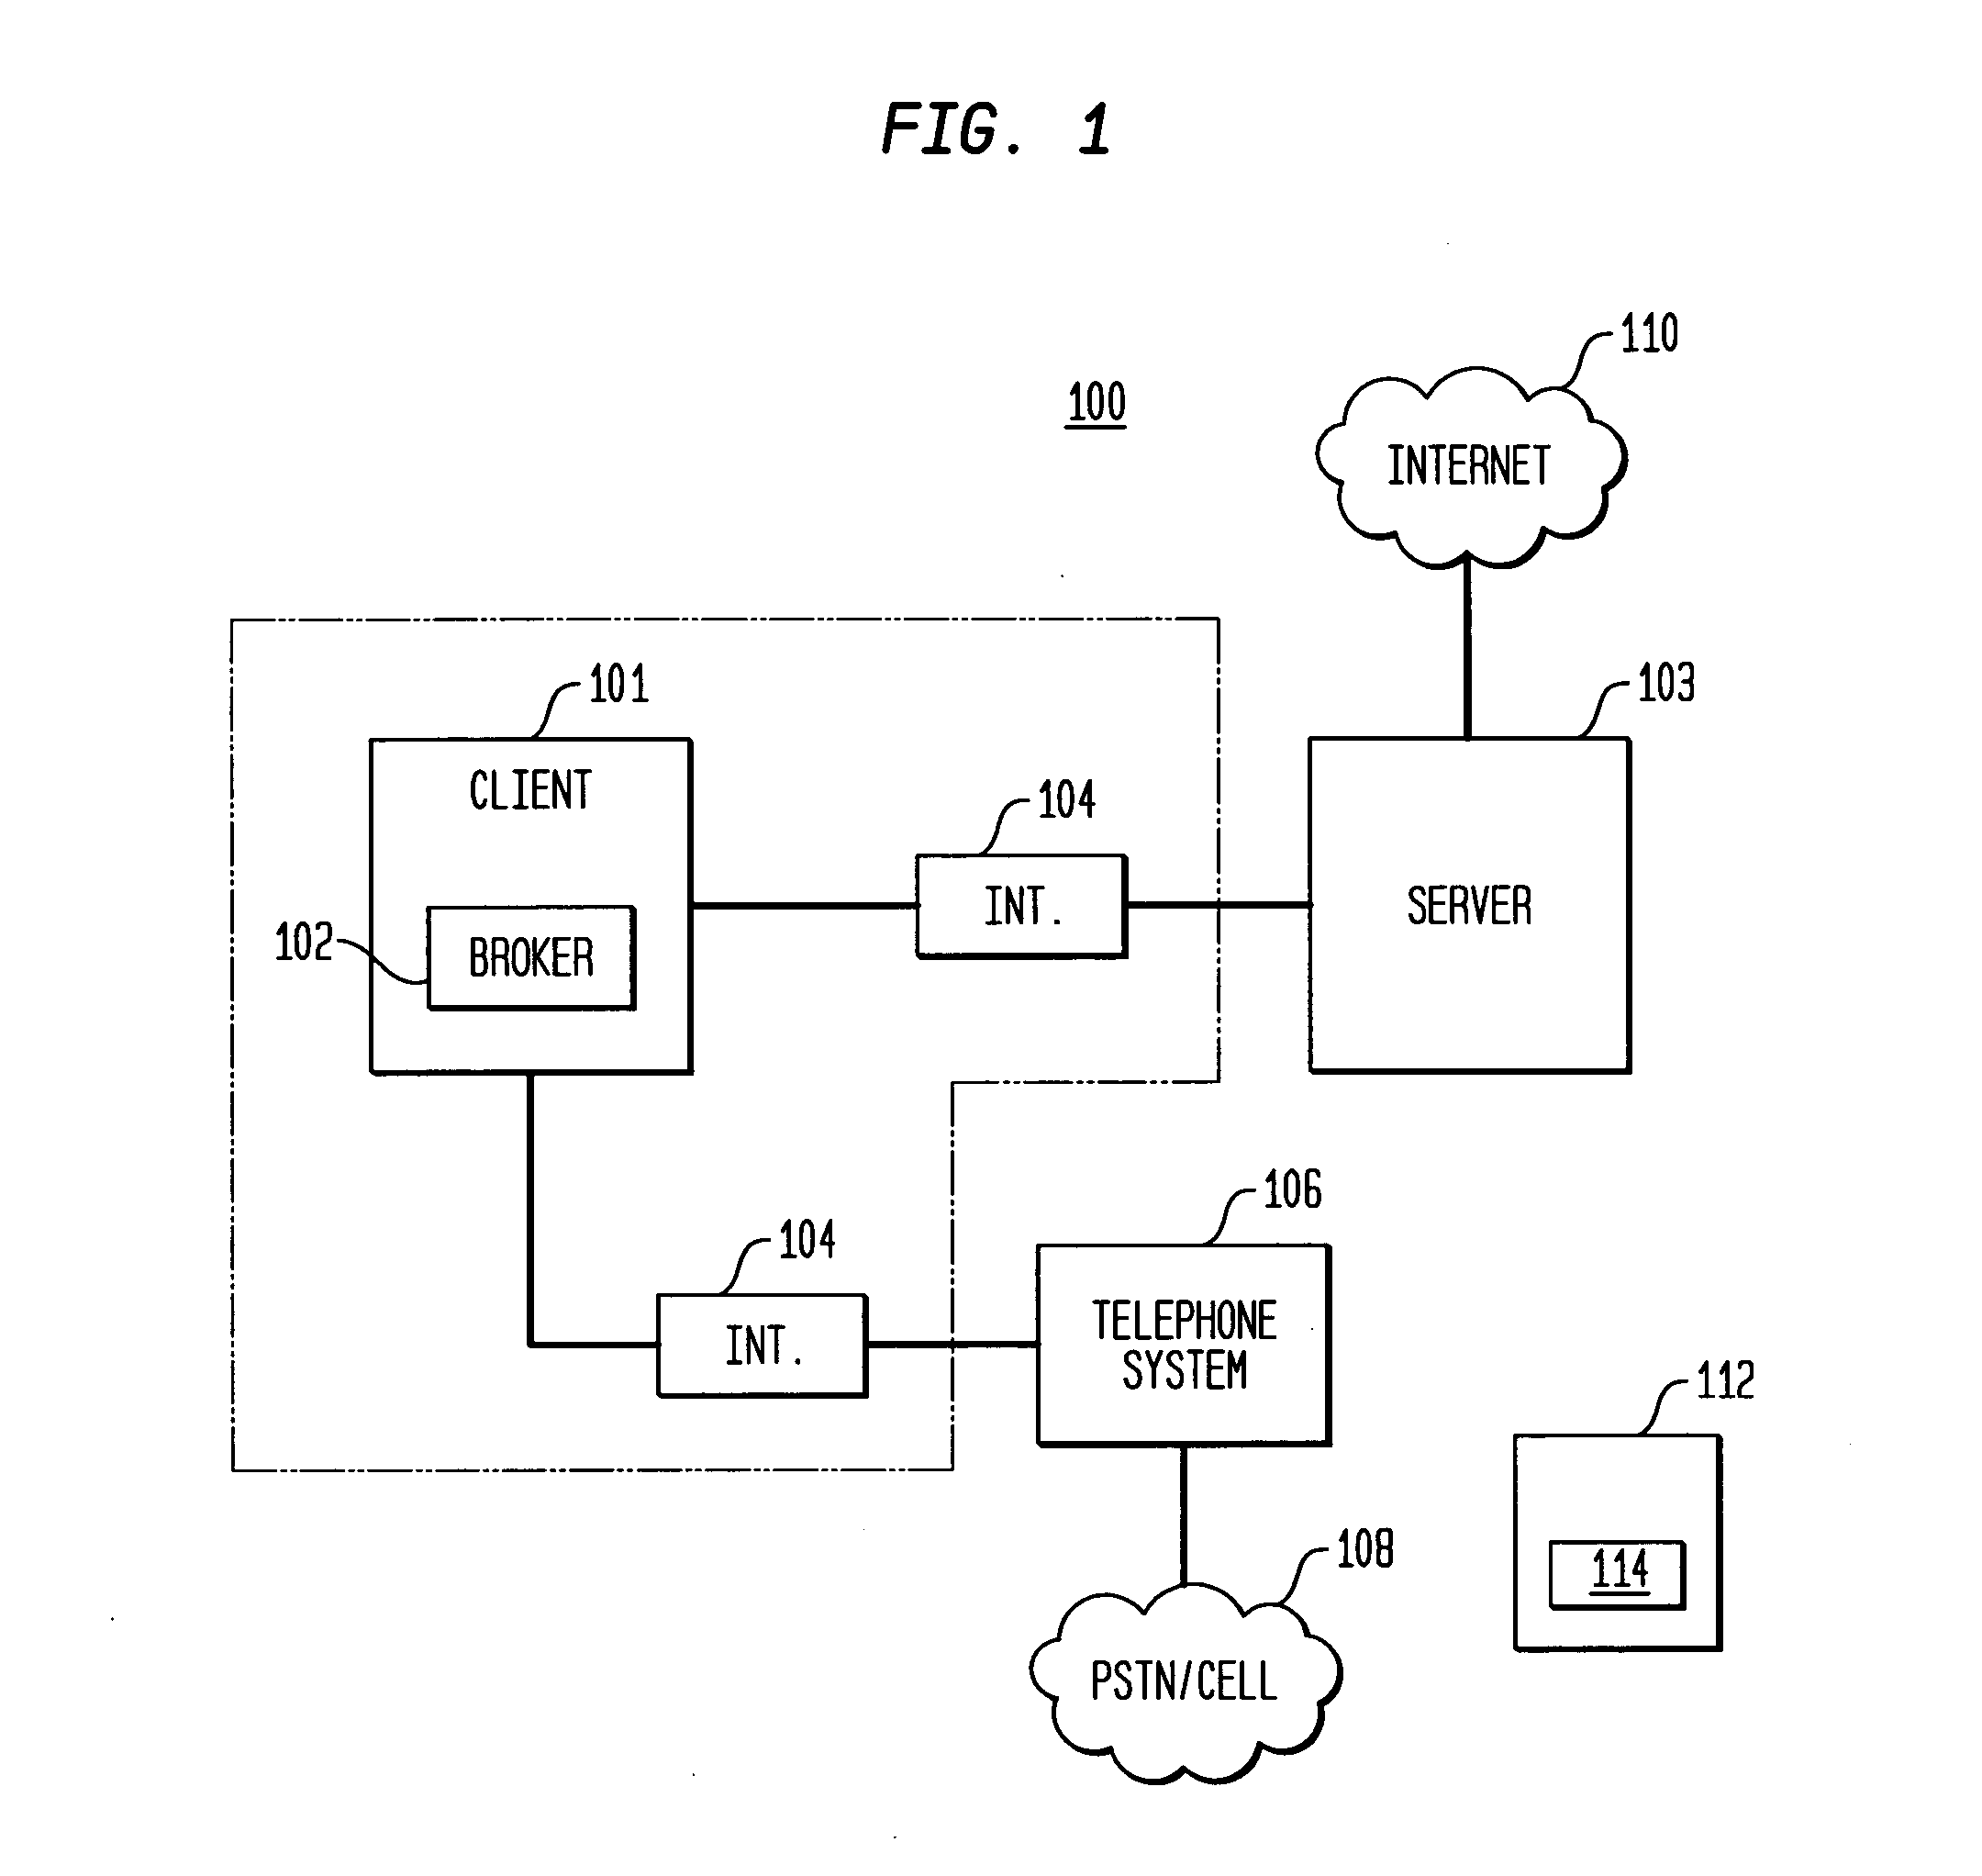 System and method for telephonic presence via e-mail and short message service